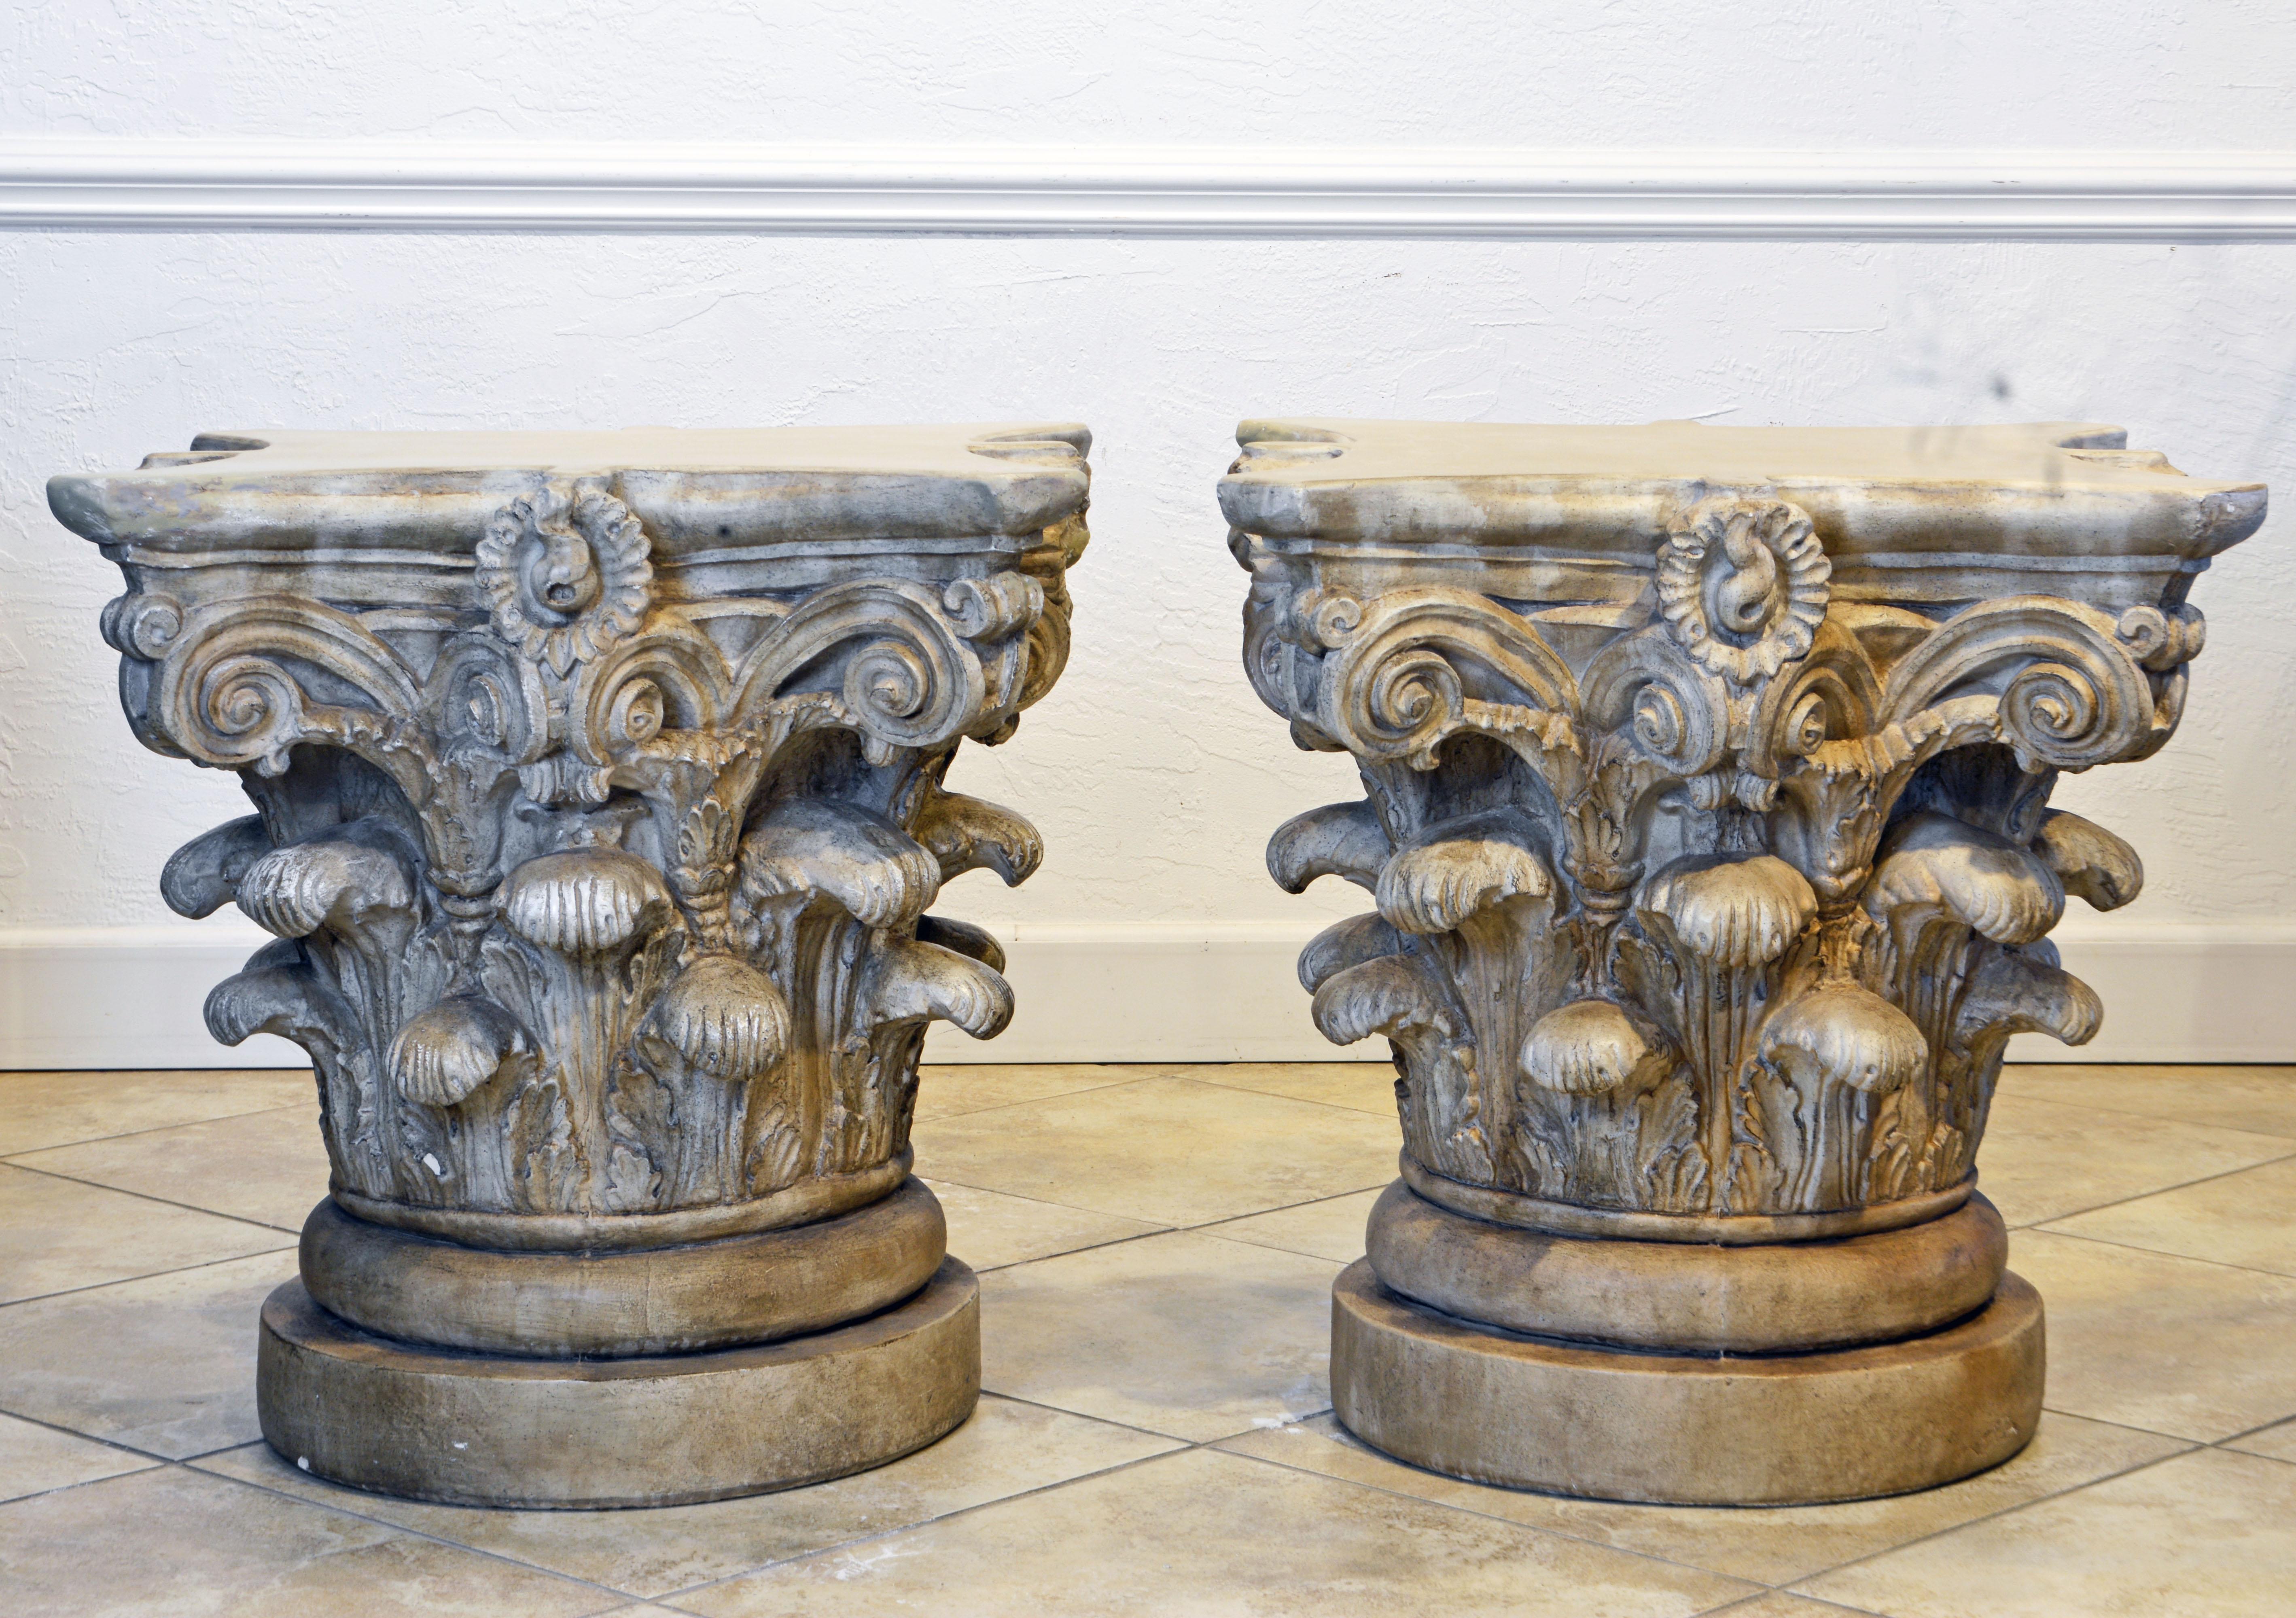 Patinated Pair of Corinthian Plaster Capitals after The Antique, Table Bases or Sculptures